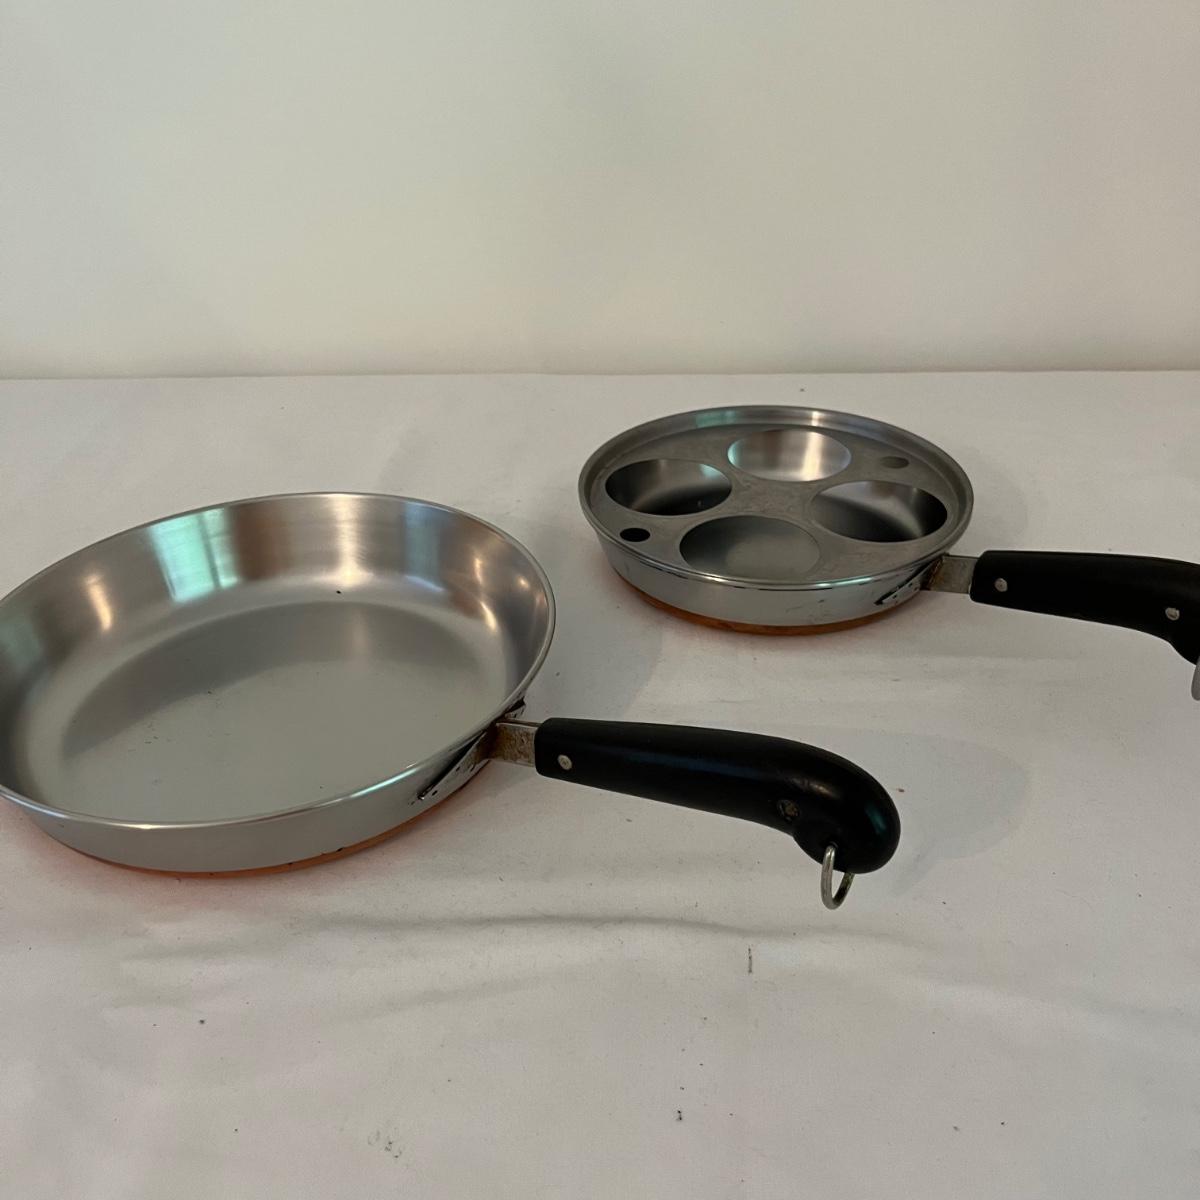 Buy Set of Four Vintage Revere Ware Copper Clad Cookware Online at